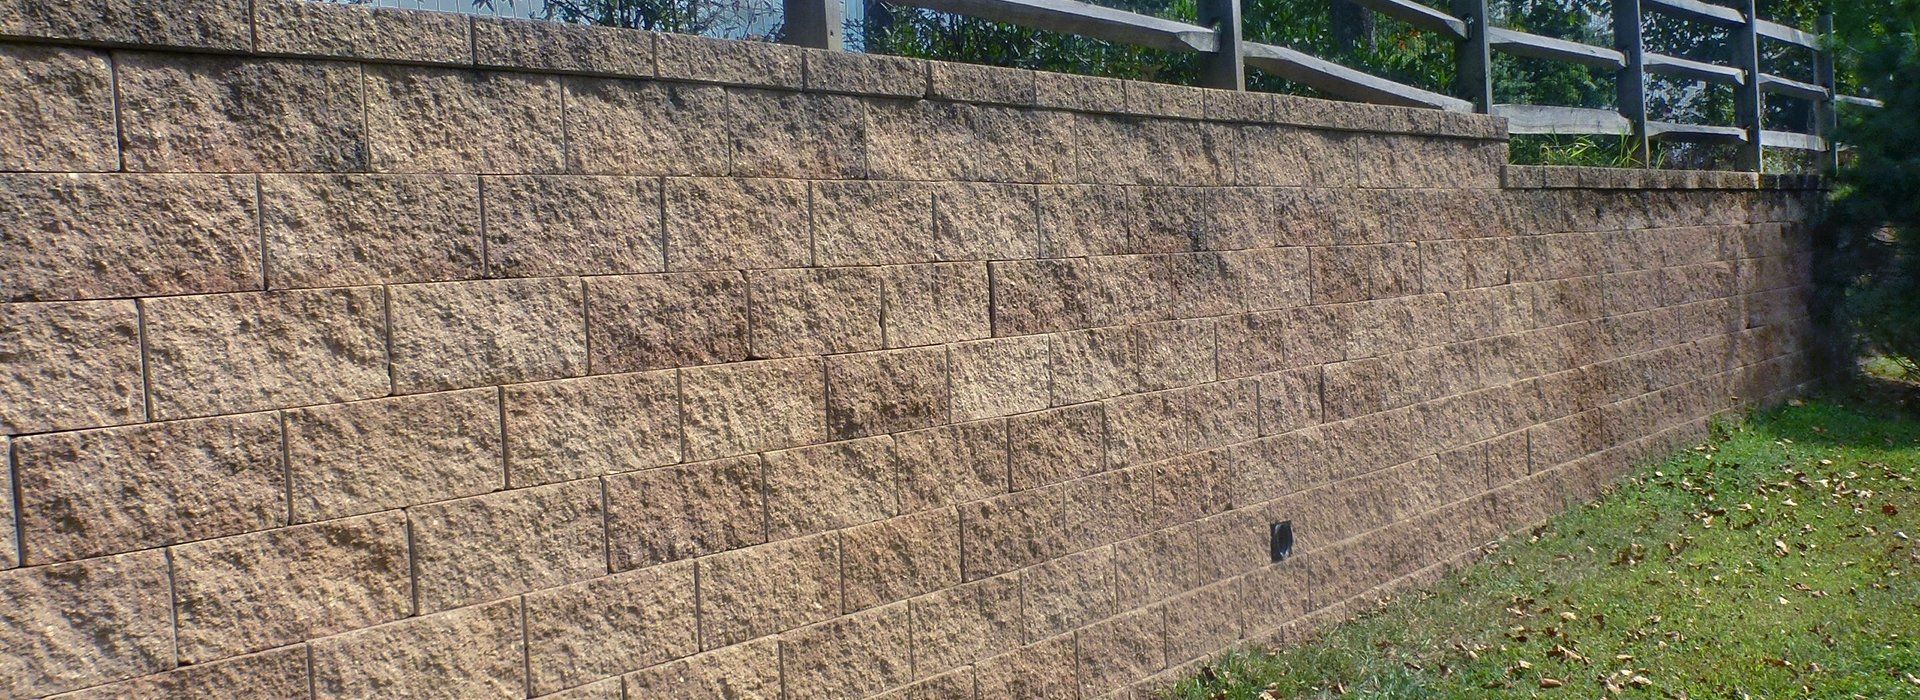 Benefits of a Retaining Wall As Your Next Home Improvement Project